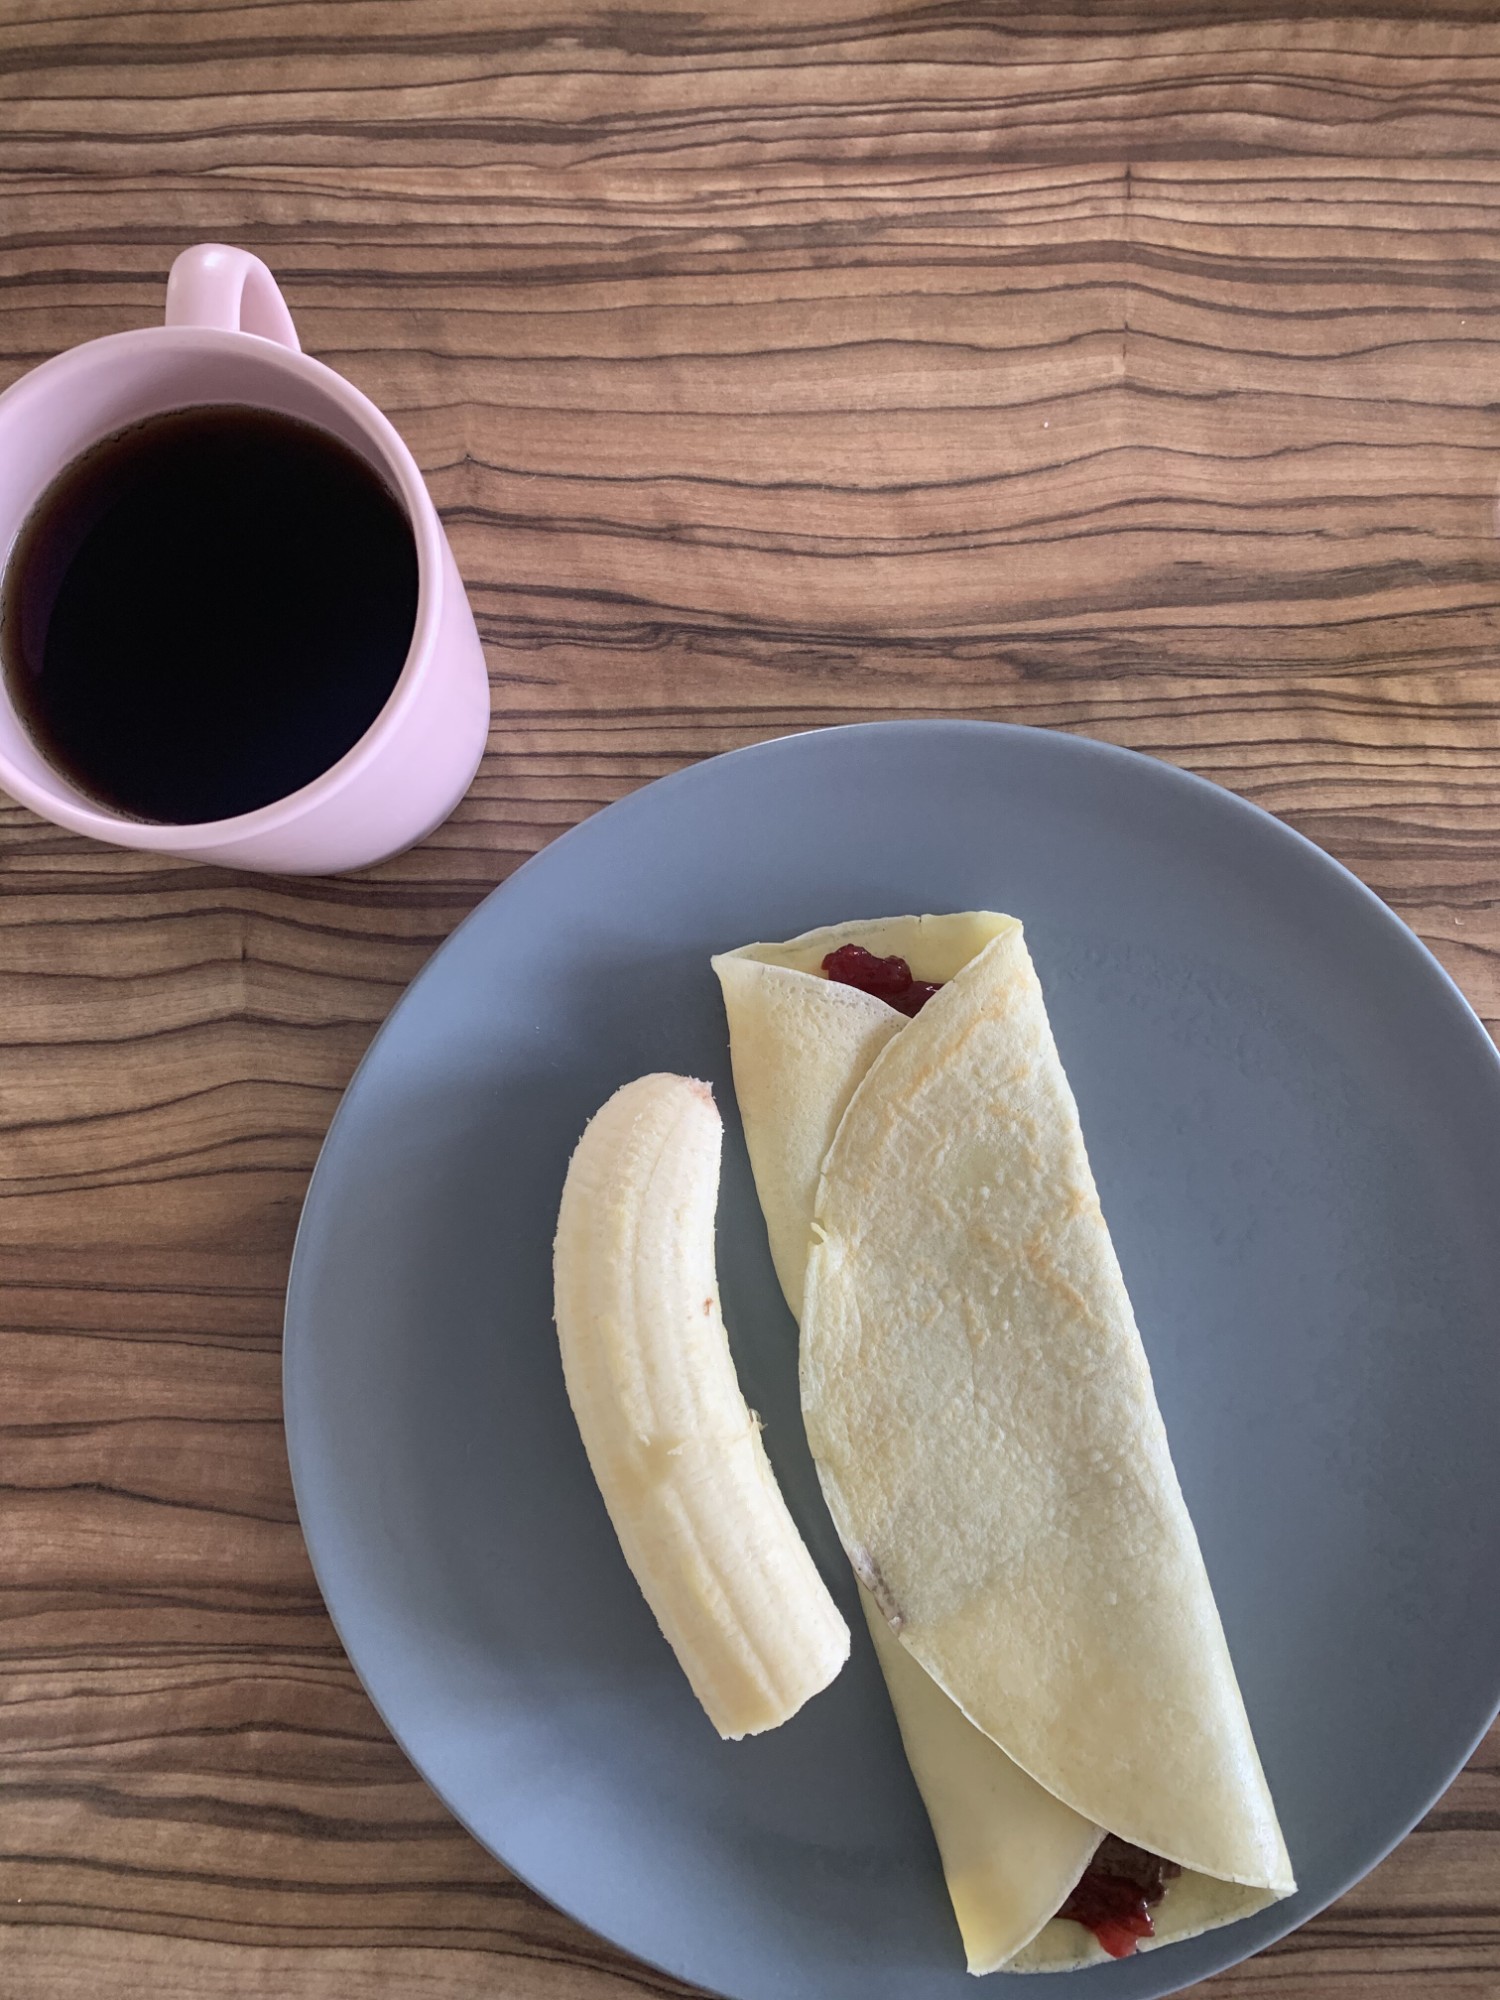 French crepes recipe from 9to5 Nomad for Wanderful